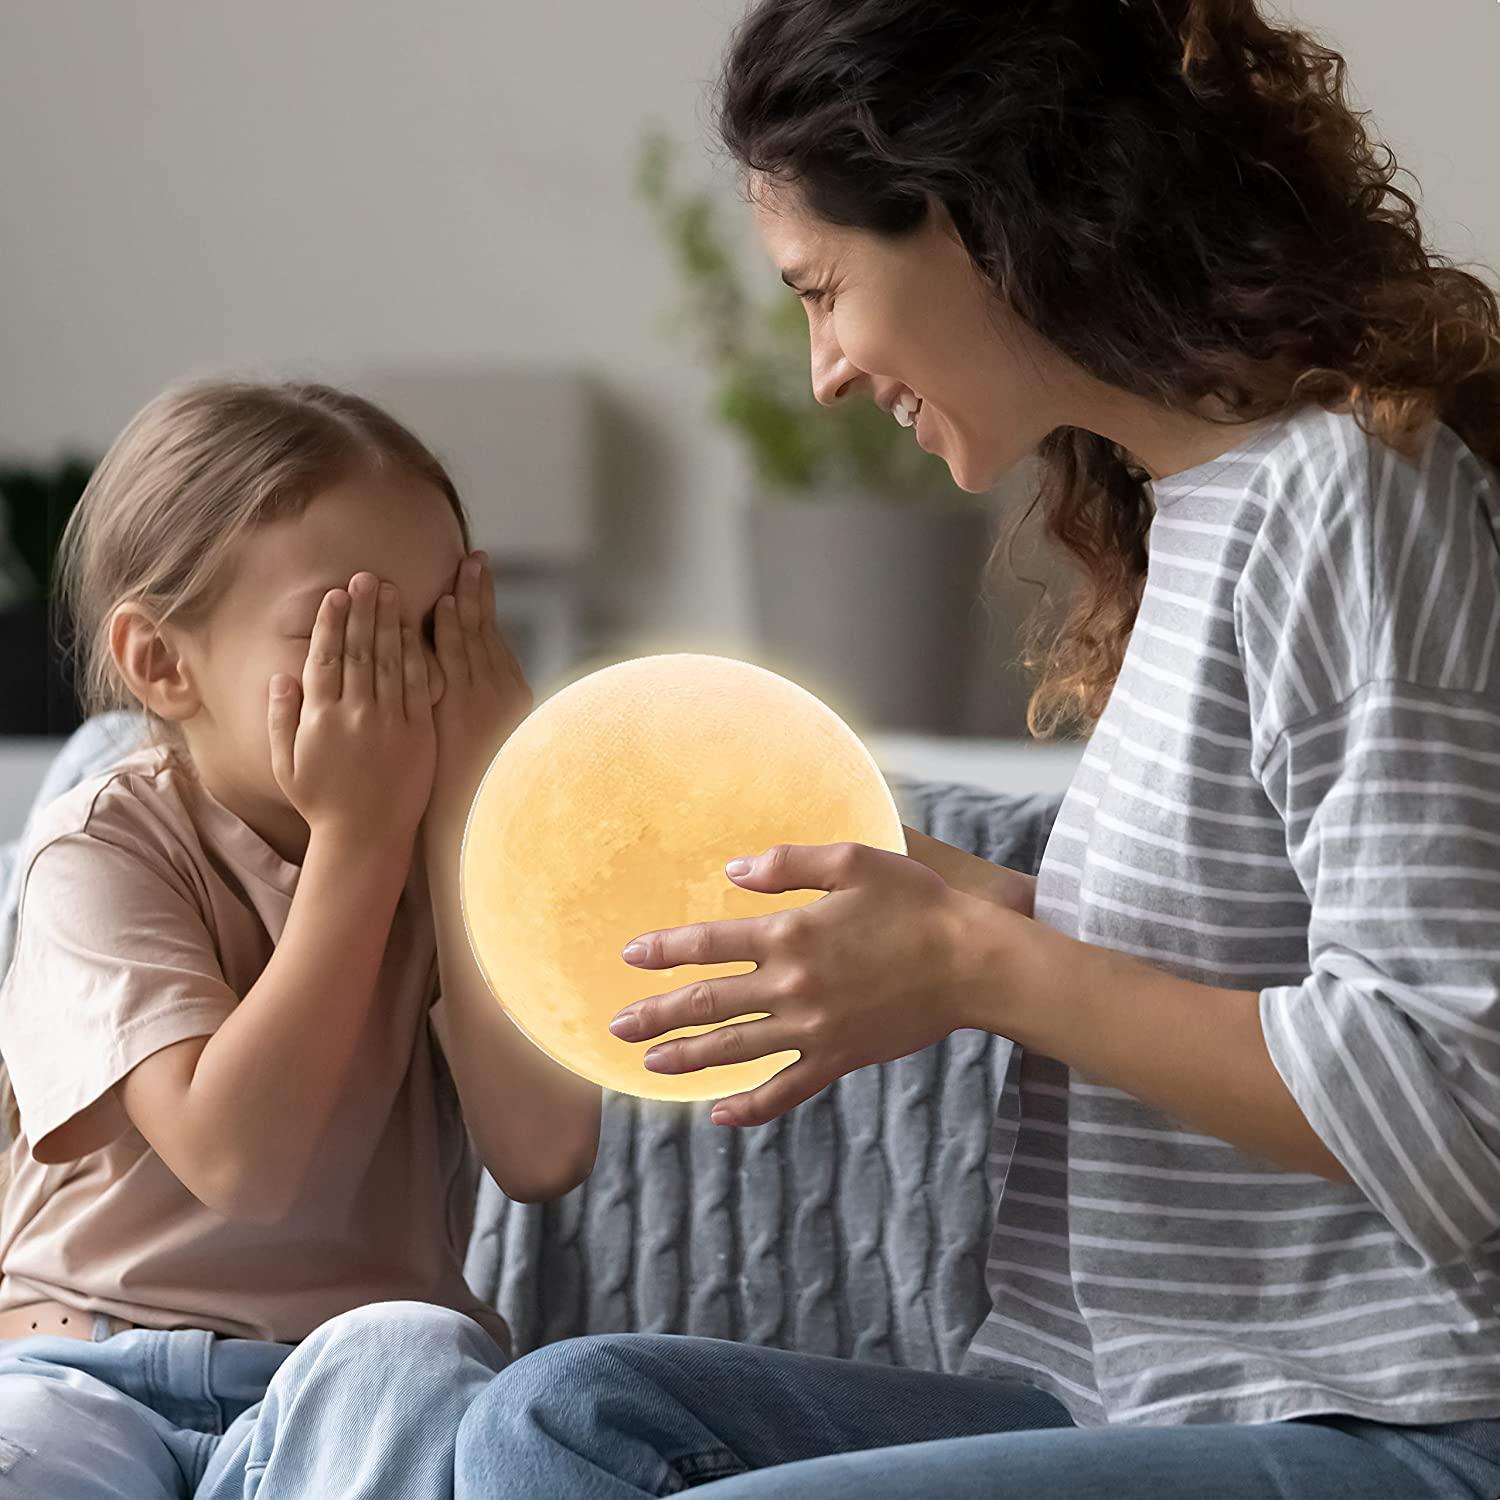 3D Moon Lamp with 5.9 Inch Wooden Base - LED Night Light, Mood Lighting with Touch Control Brightness for Home Décor, Bedroom, Gifts Kids Women Christmas New Year Birthday - White & Yellow - CraftEmporio